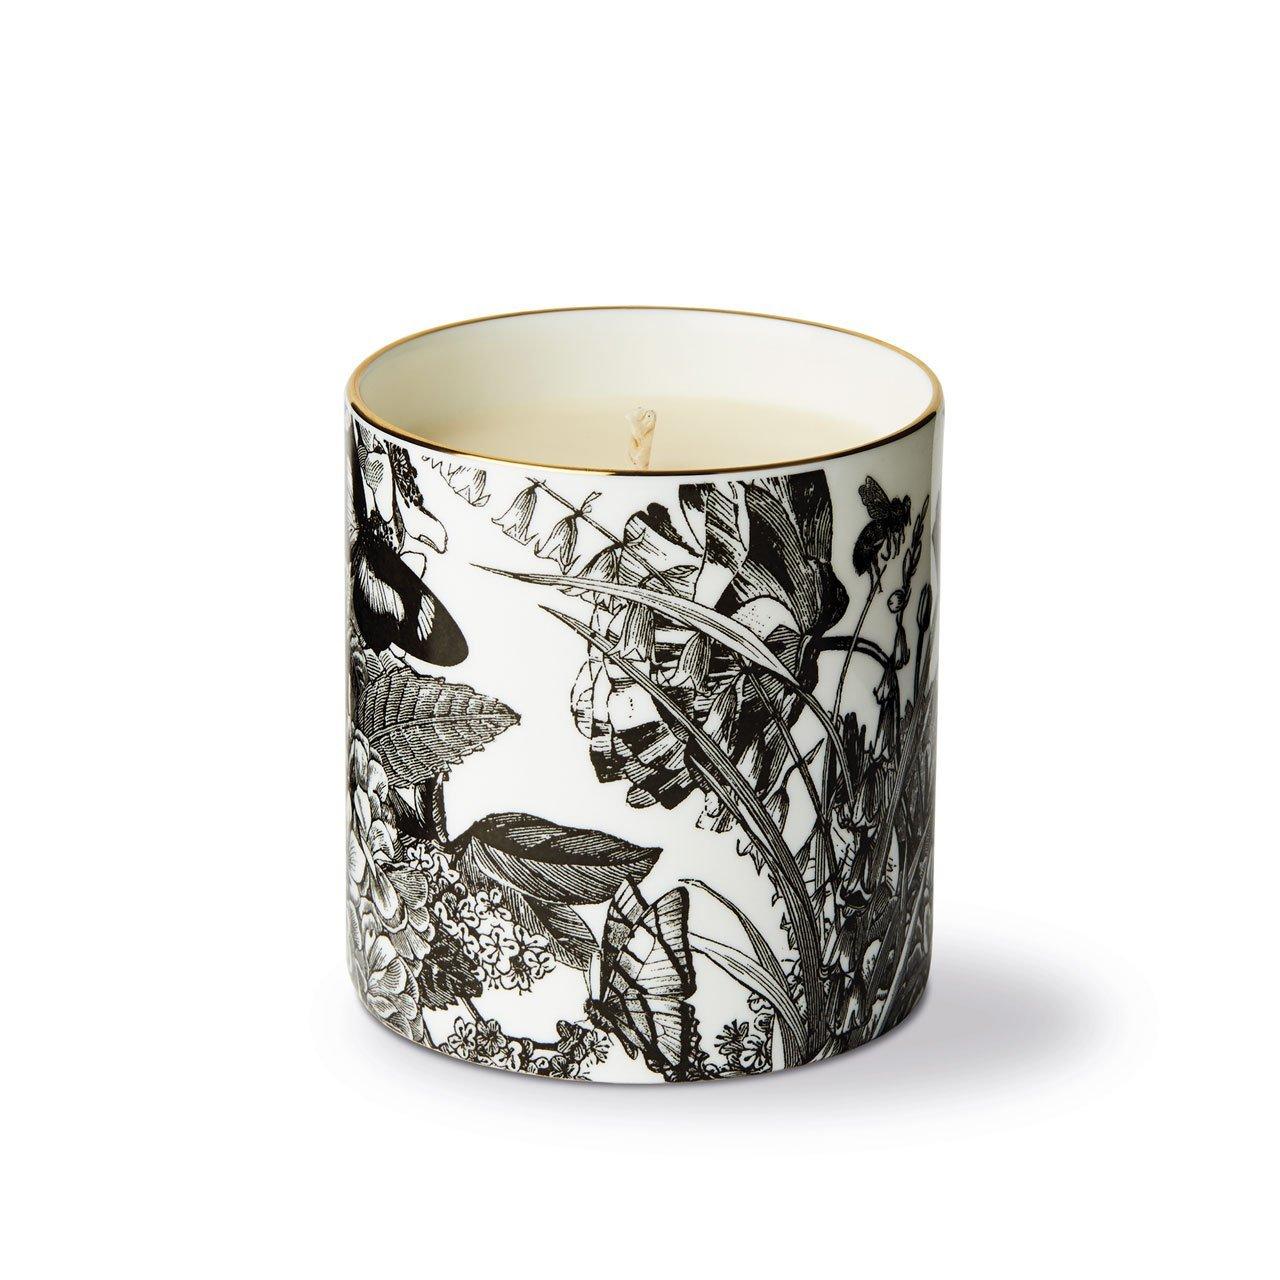 The Country Garden Ceramic Candle - Chase and Wonder - Proudly Made in Britain